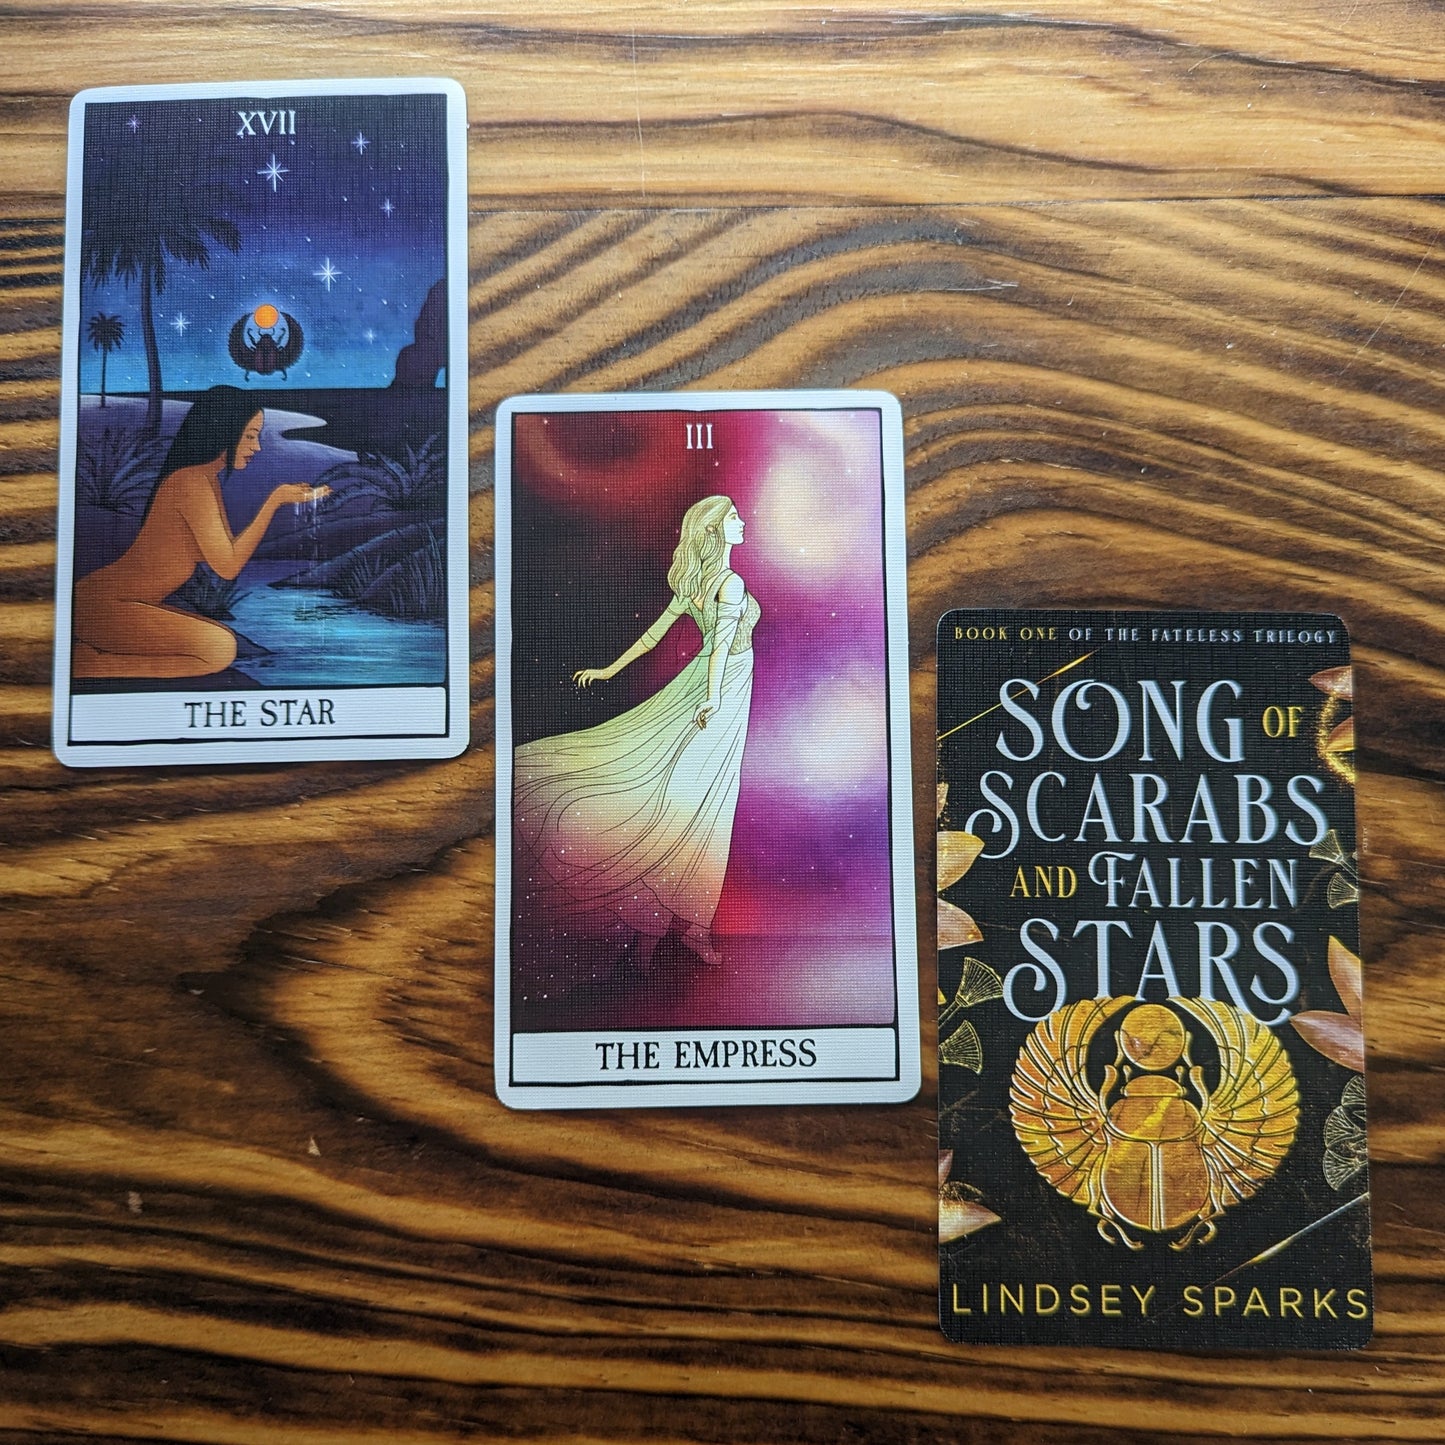 Song of Scarabs and Fallen Stars (Fateless Trilogy, book 1) - Signed Hardcover + 3 Tarot Cards